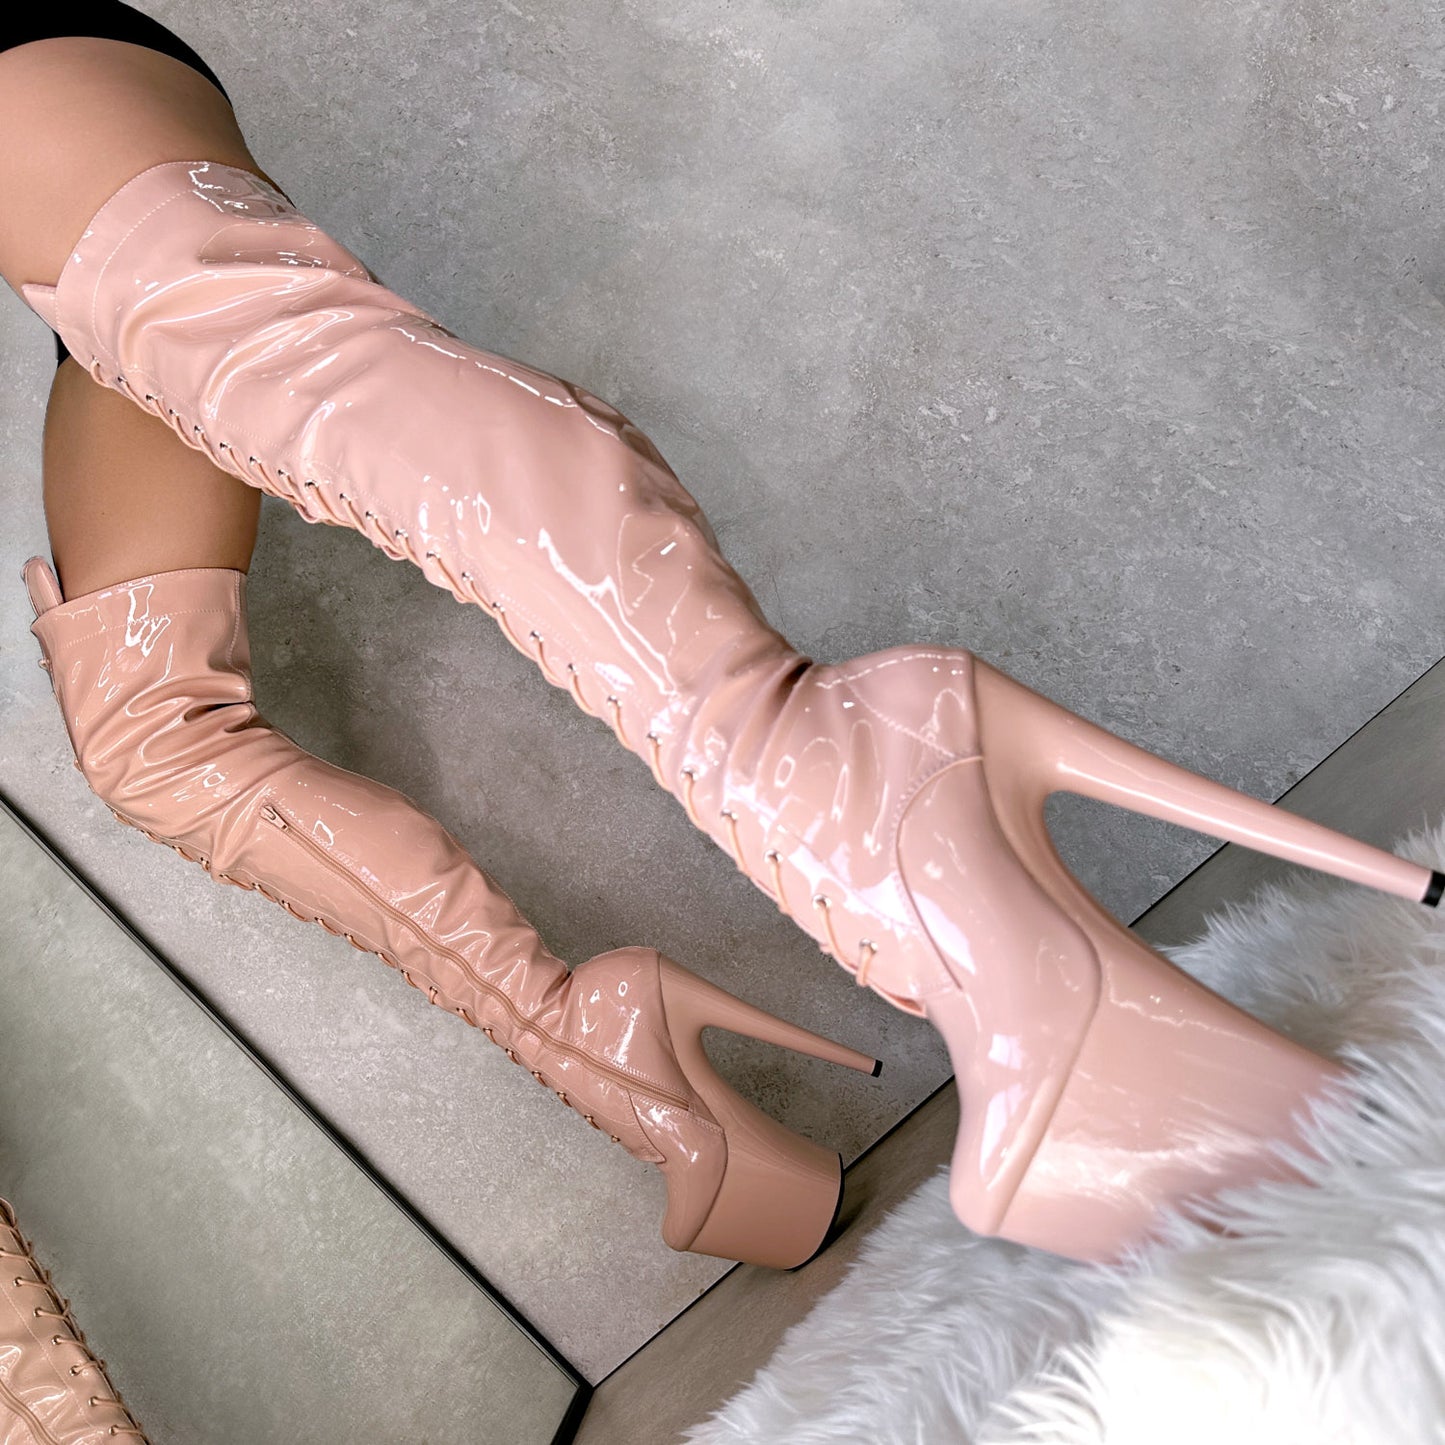 LipKit Thigh High Front Lace - Dream On - 8 INCH